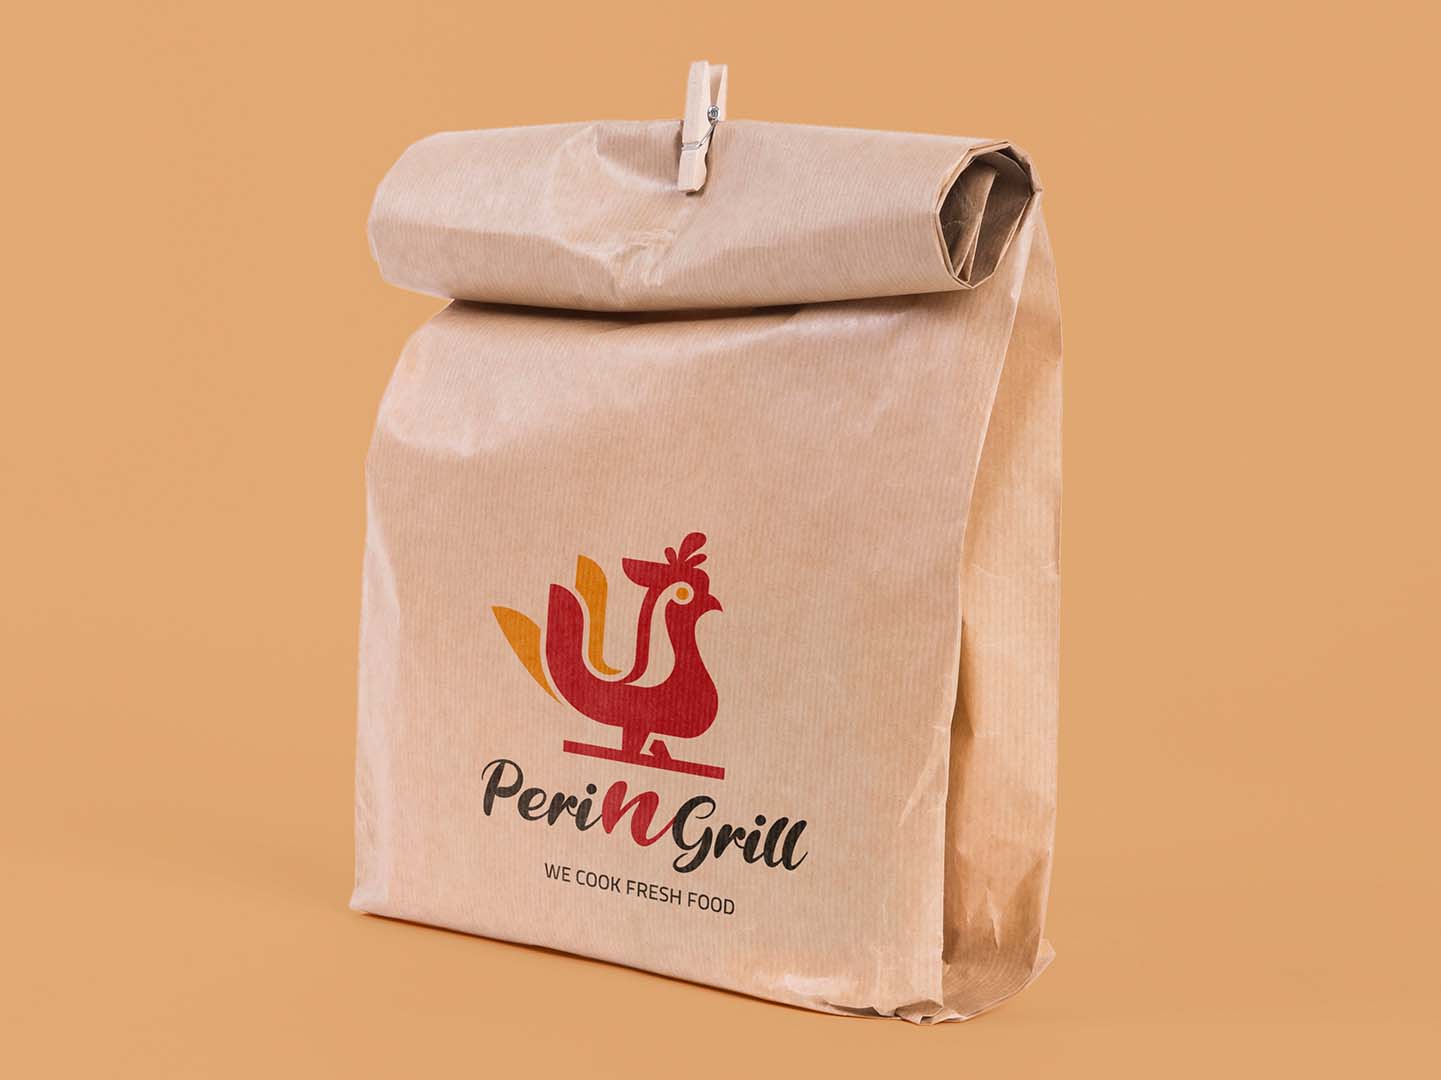 simple and cute chicken logo printed on a takeaway bag